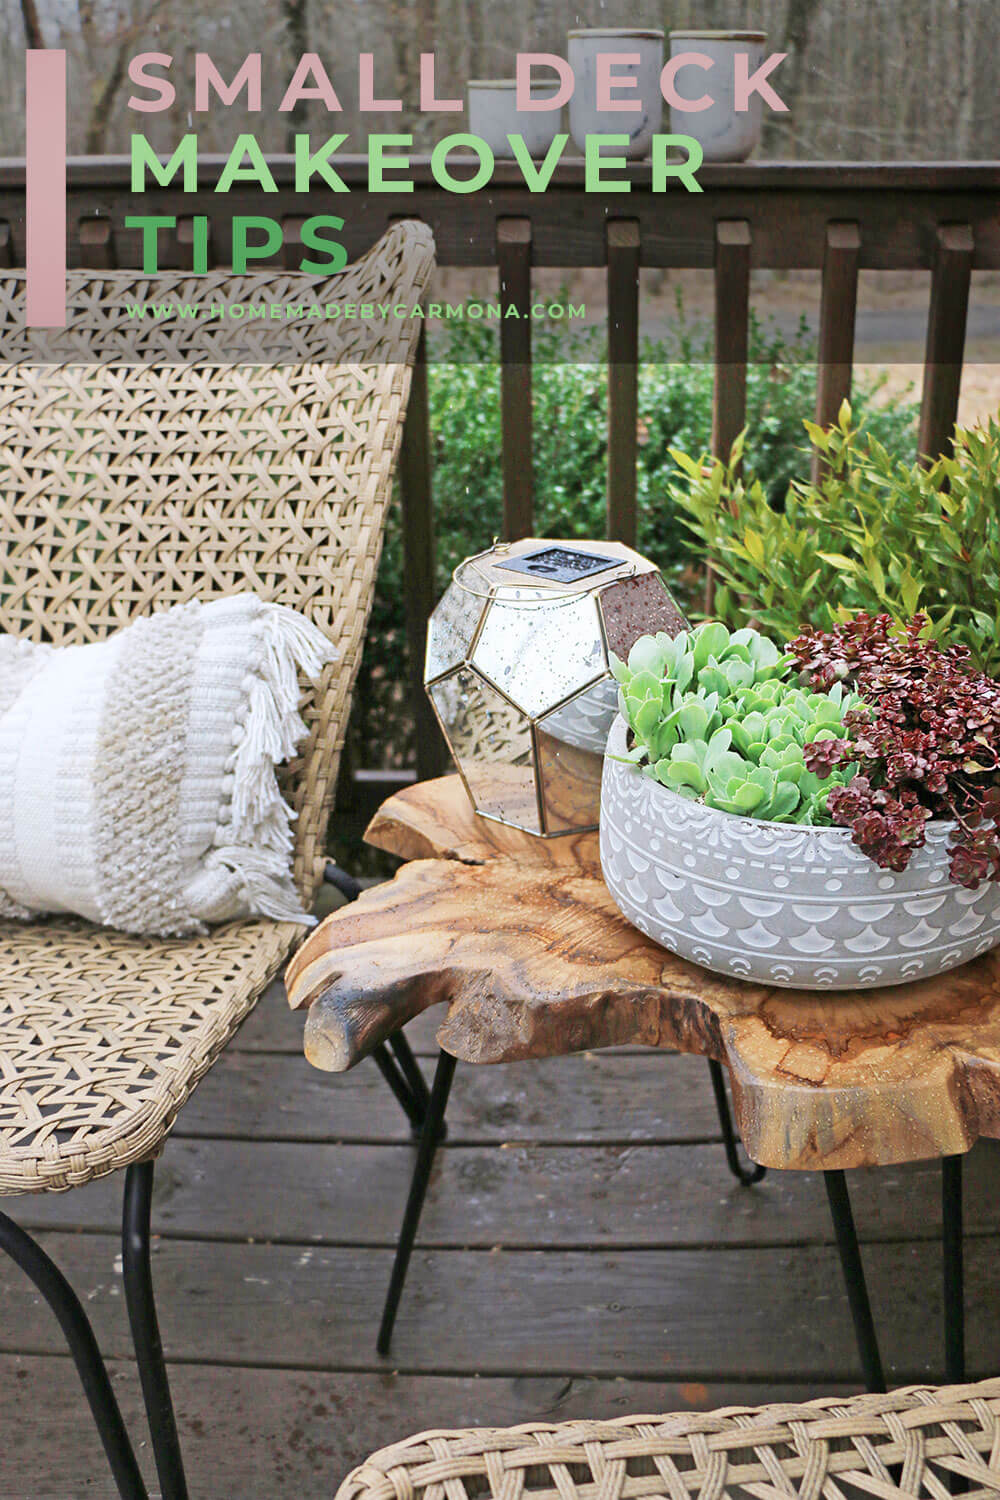 Small Deck Makeover Tips